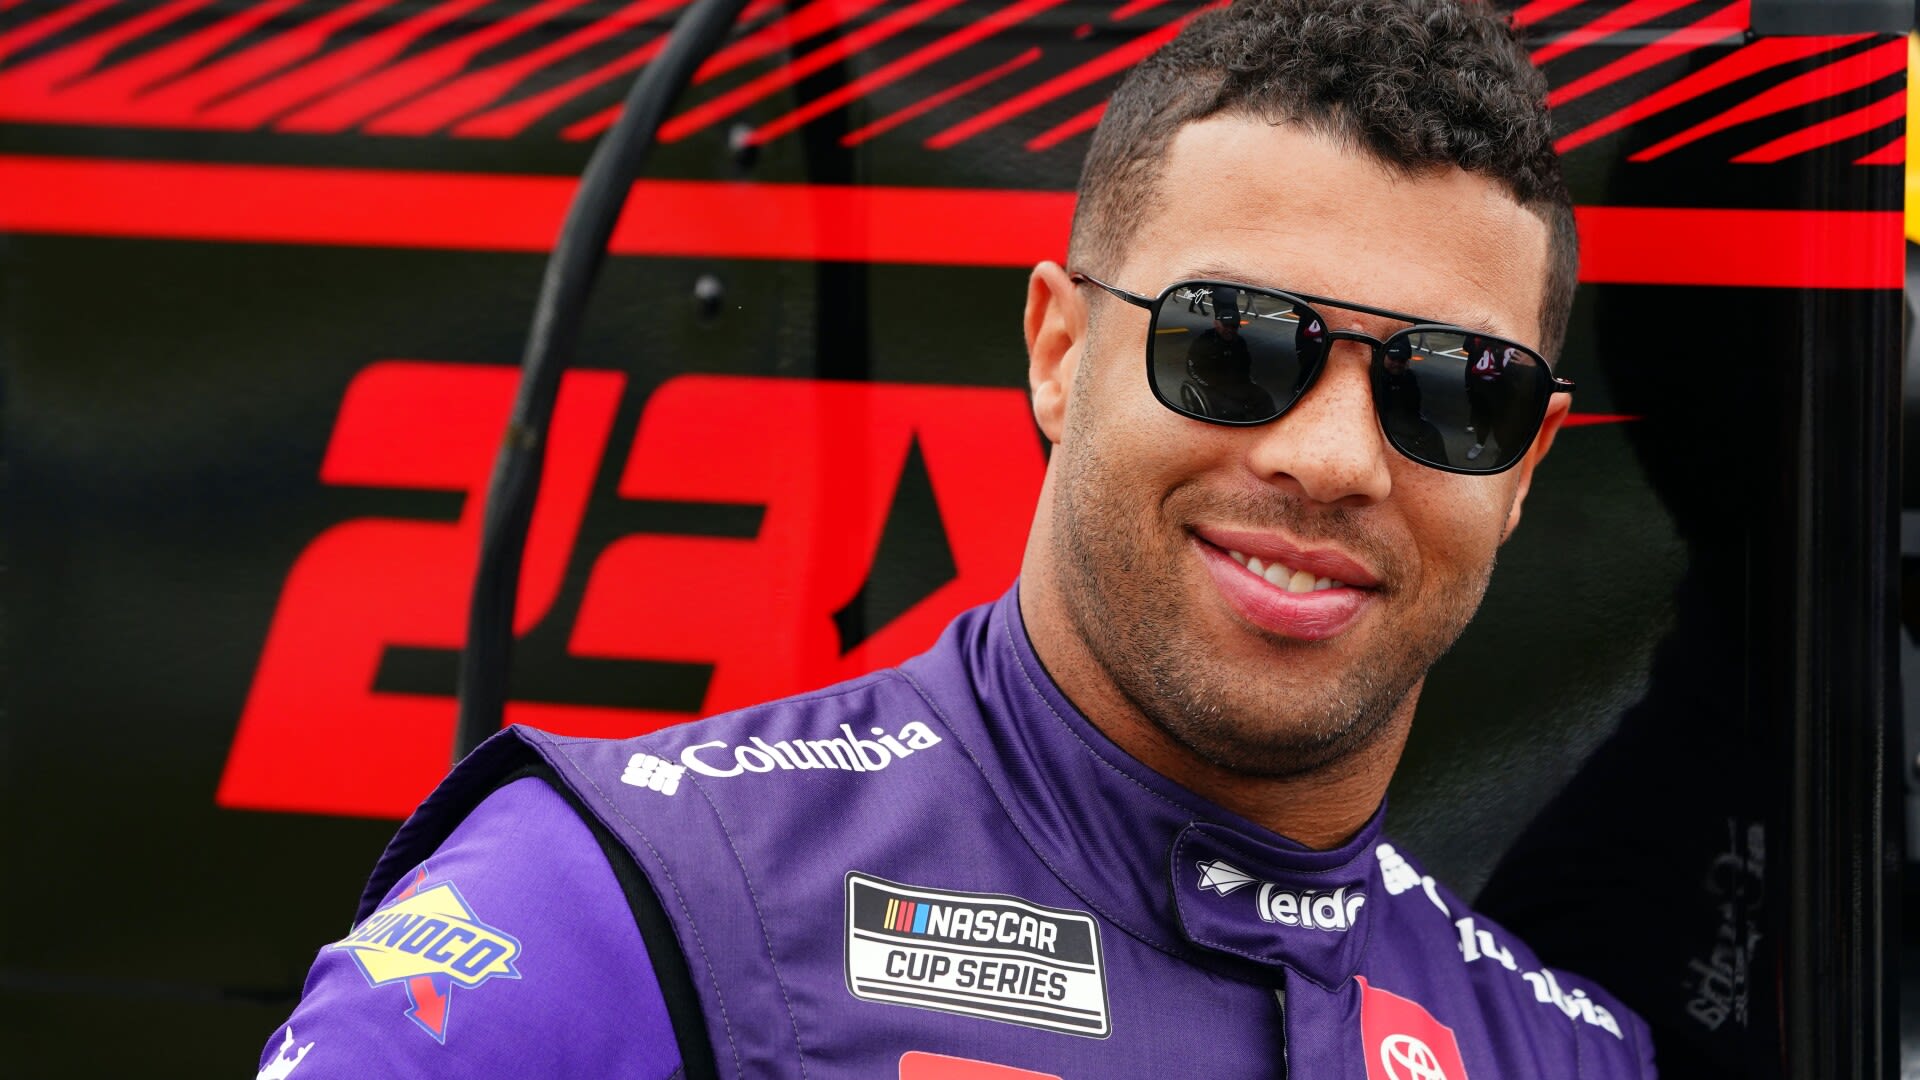 Bubba Wallace moves into a NASCAR Cup playoff spot after Coca-Cola 600